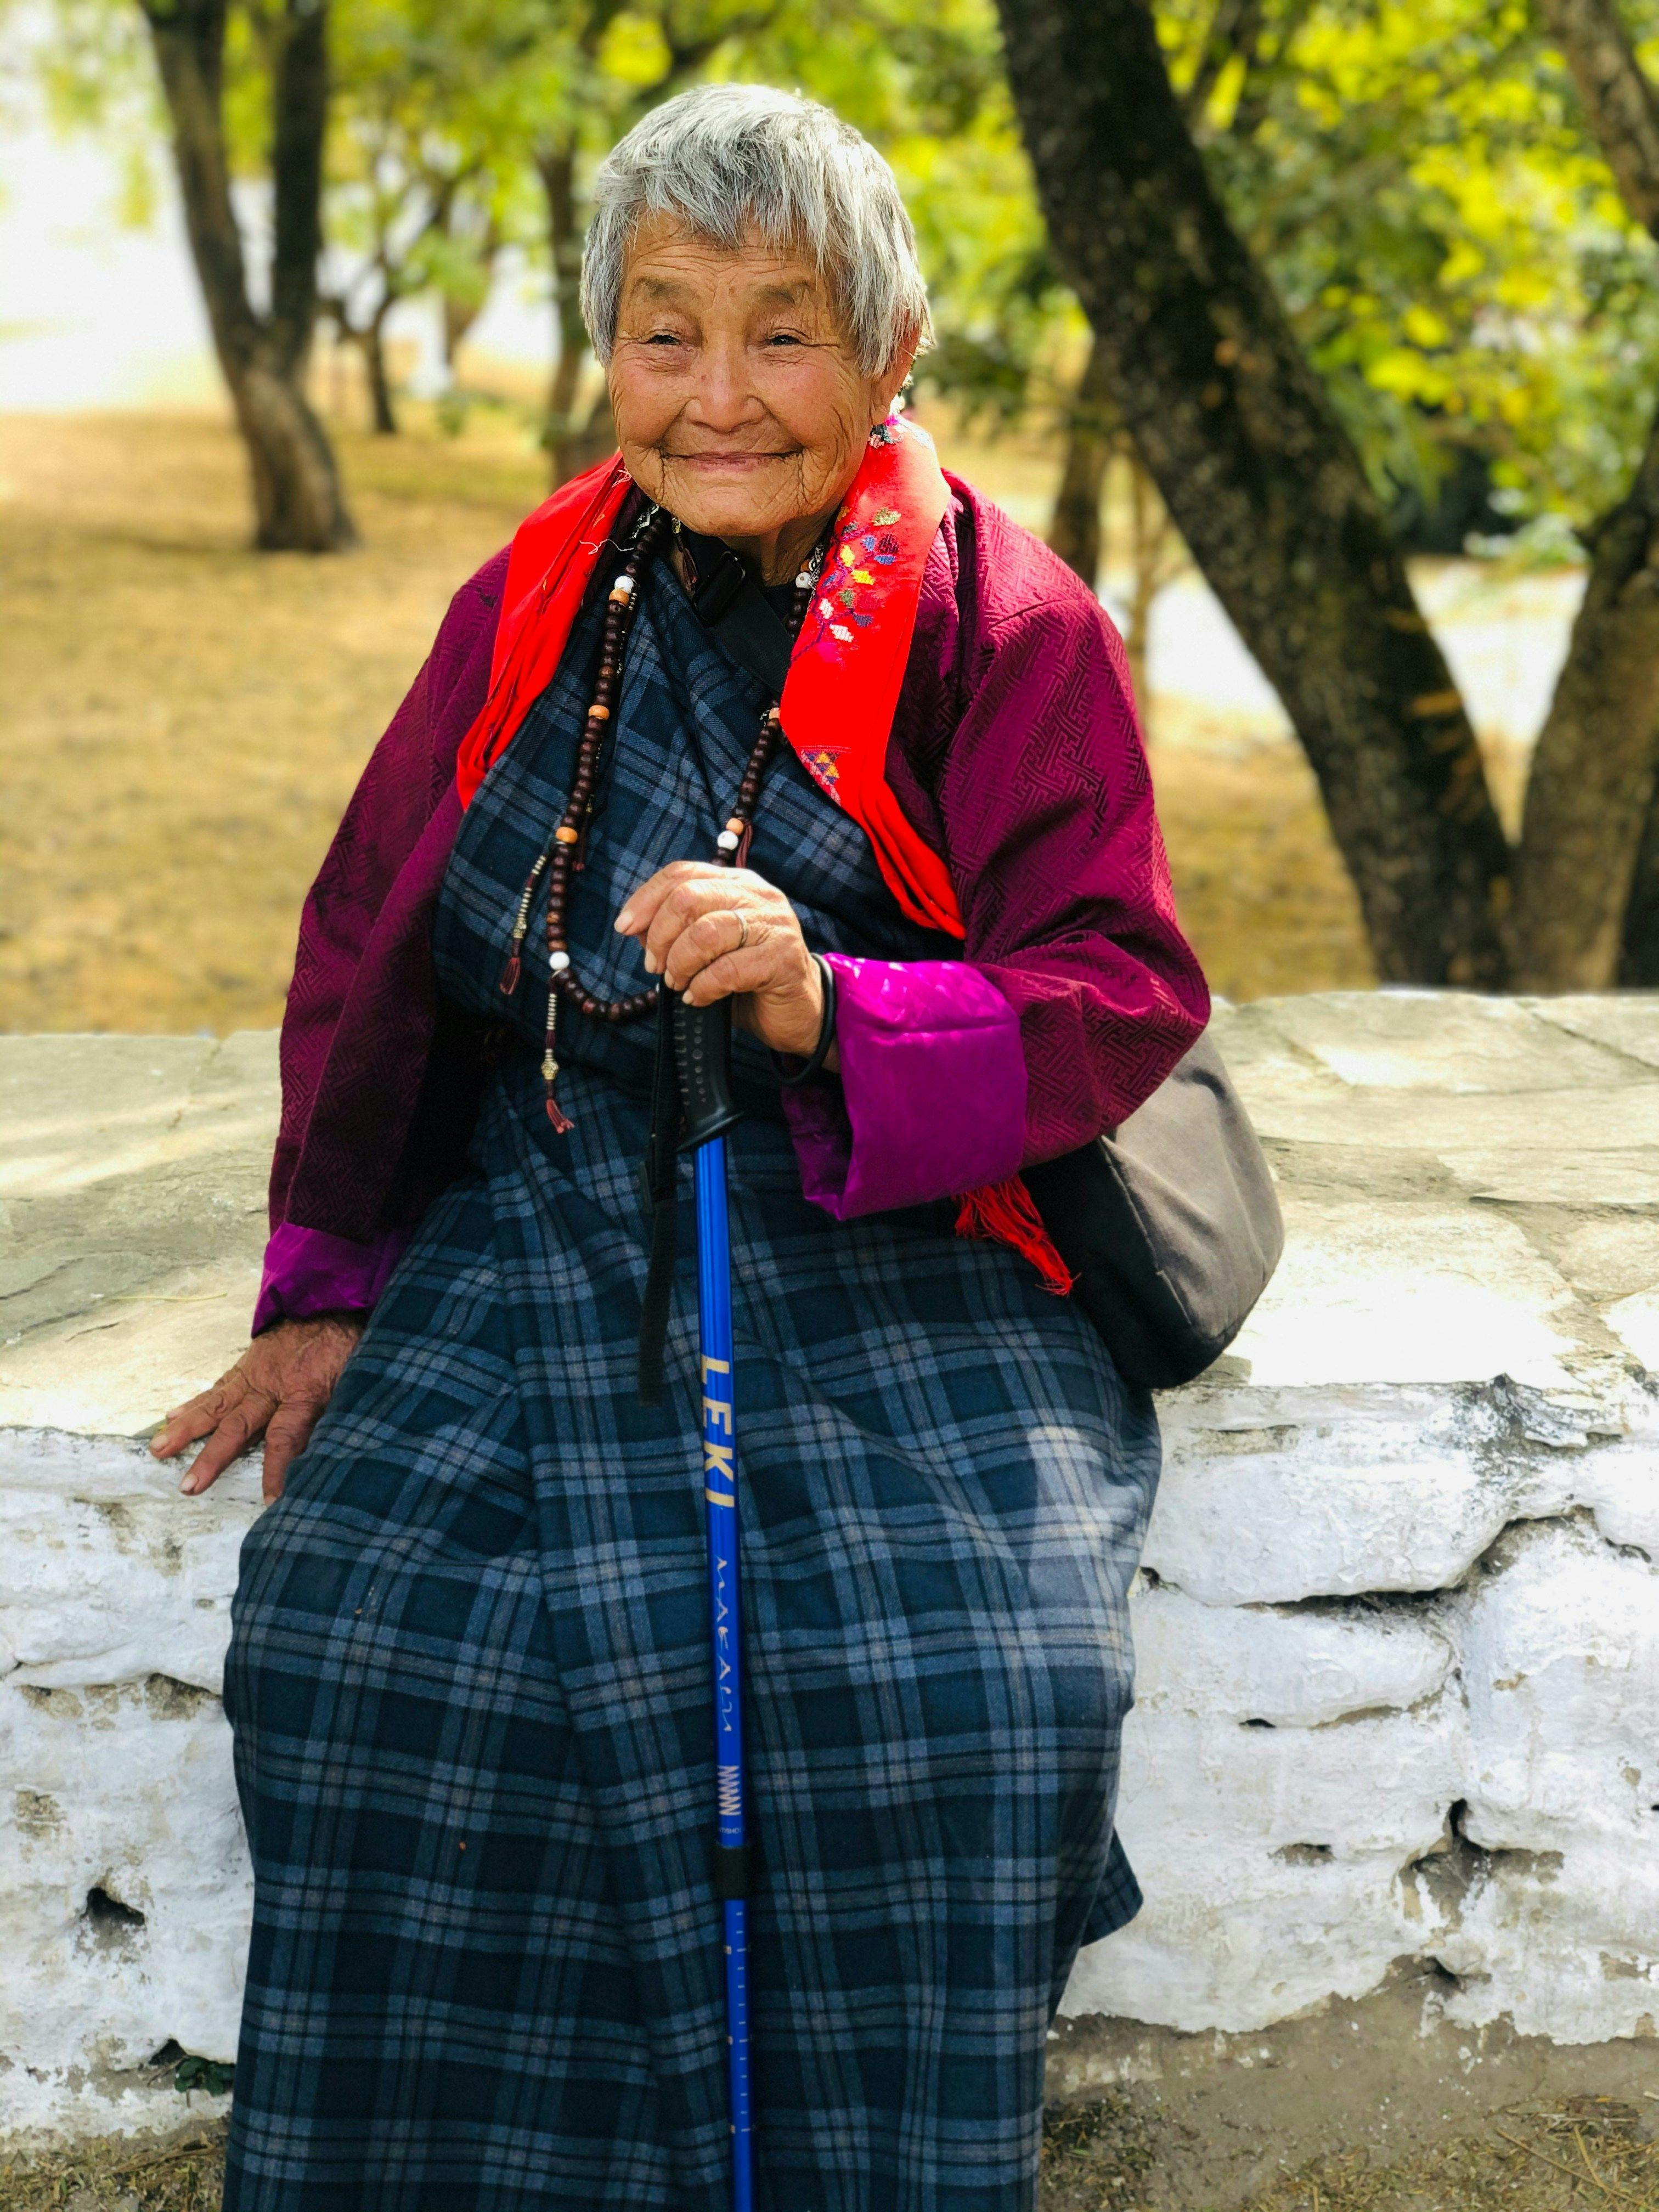 Bhutanese lady in traditional clothing.